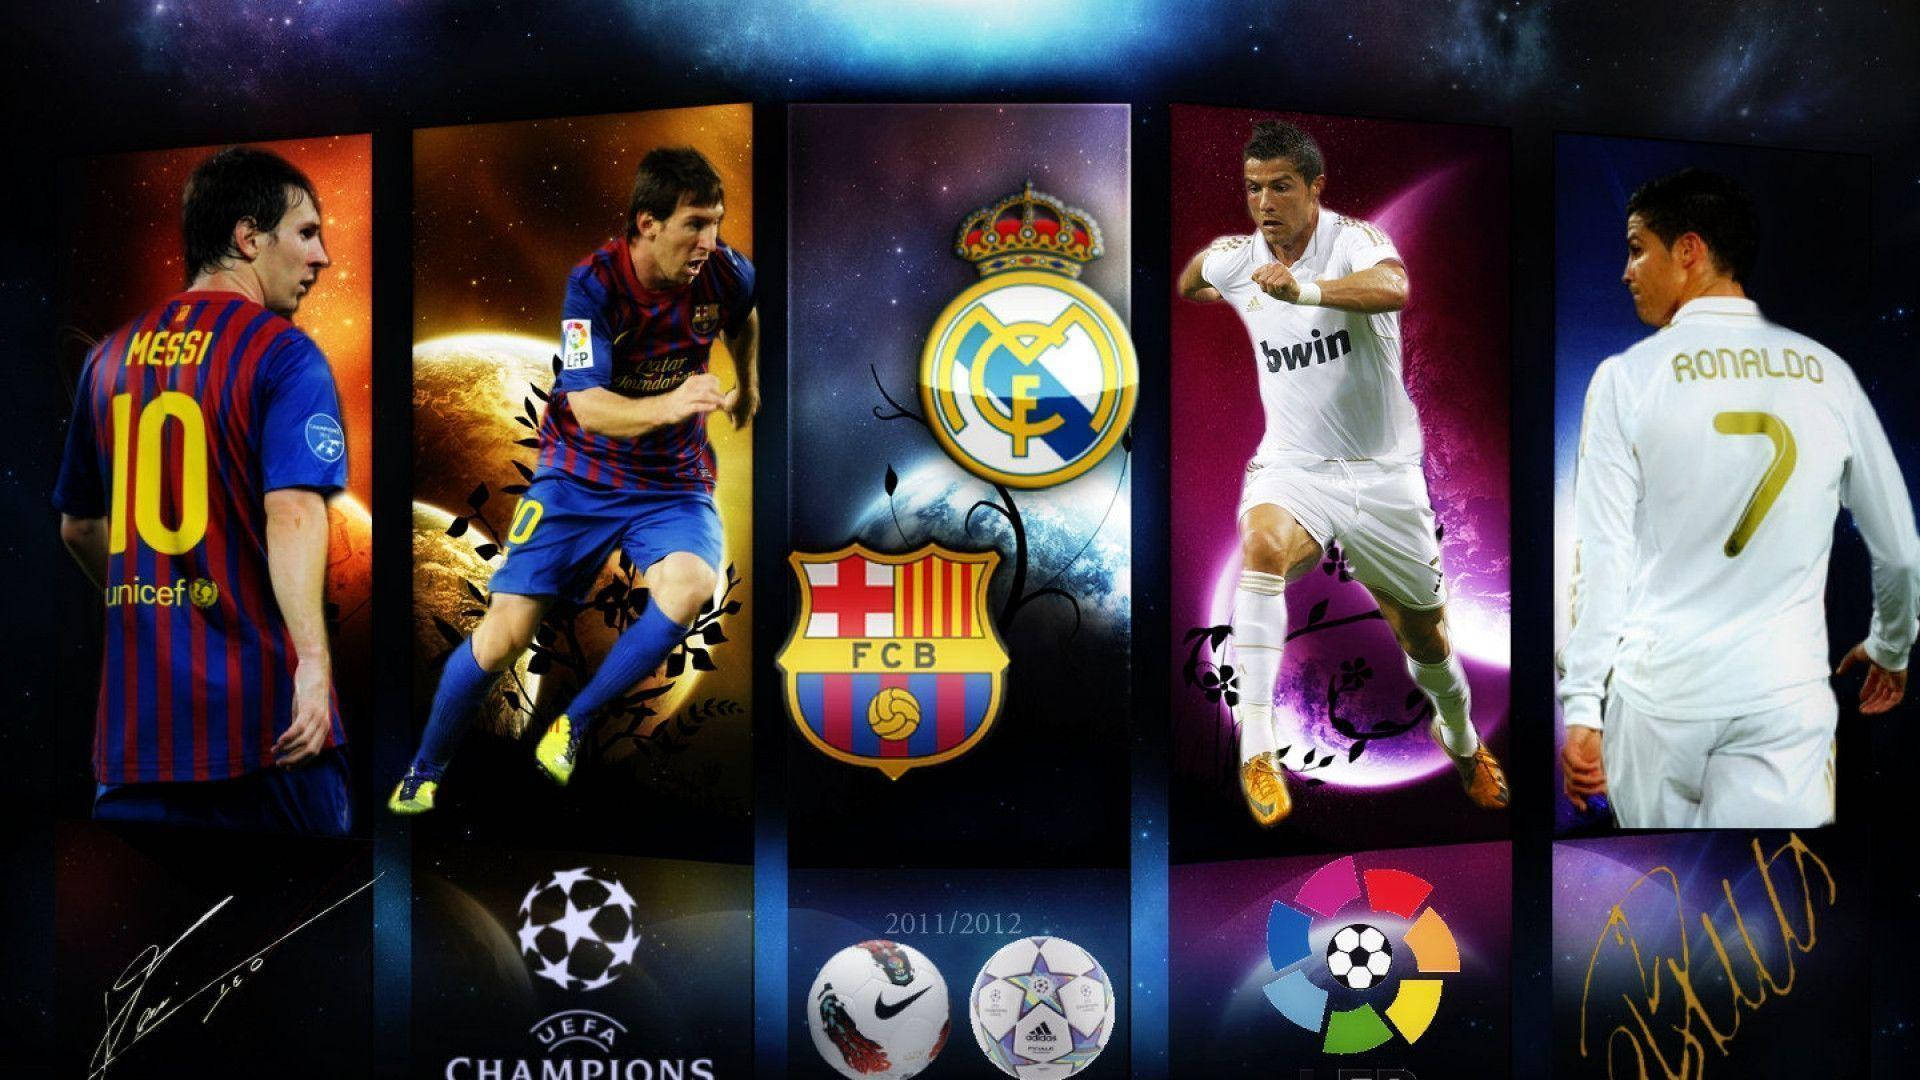 Cool Soccer Messi And Ronaldo Background